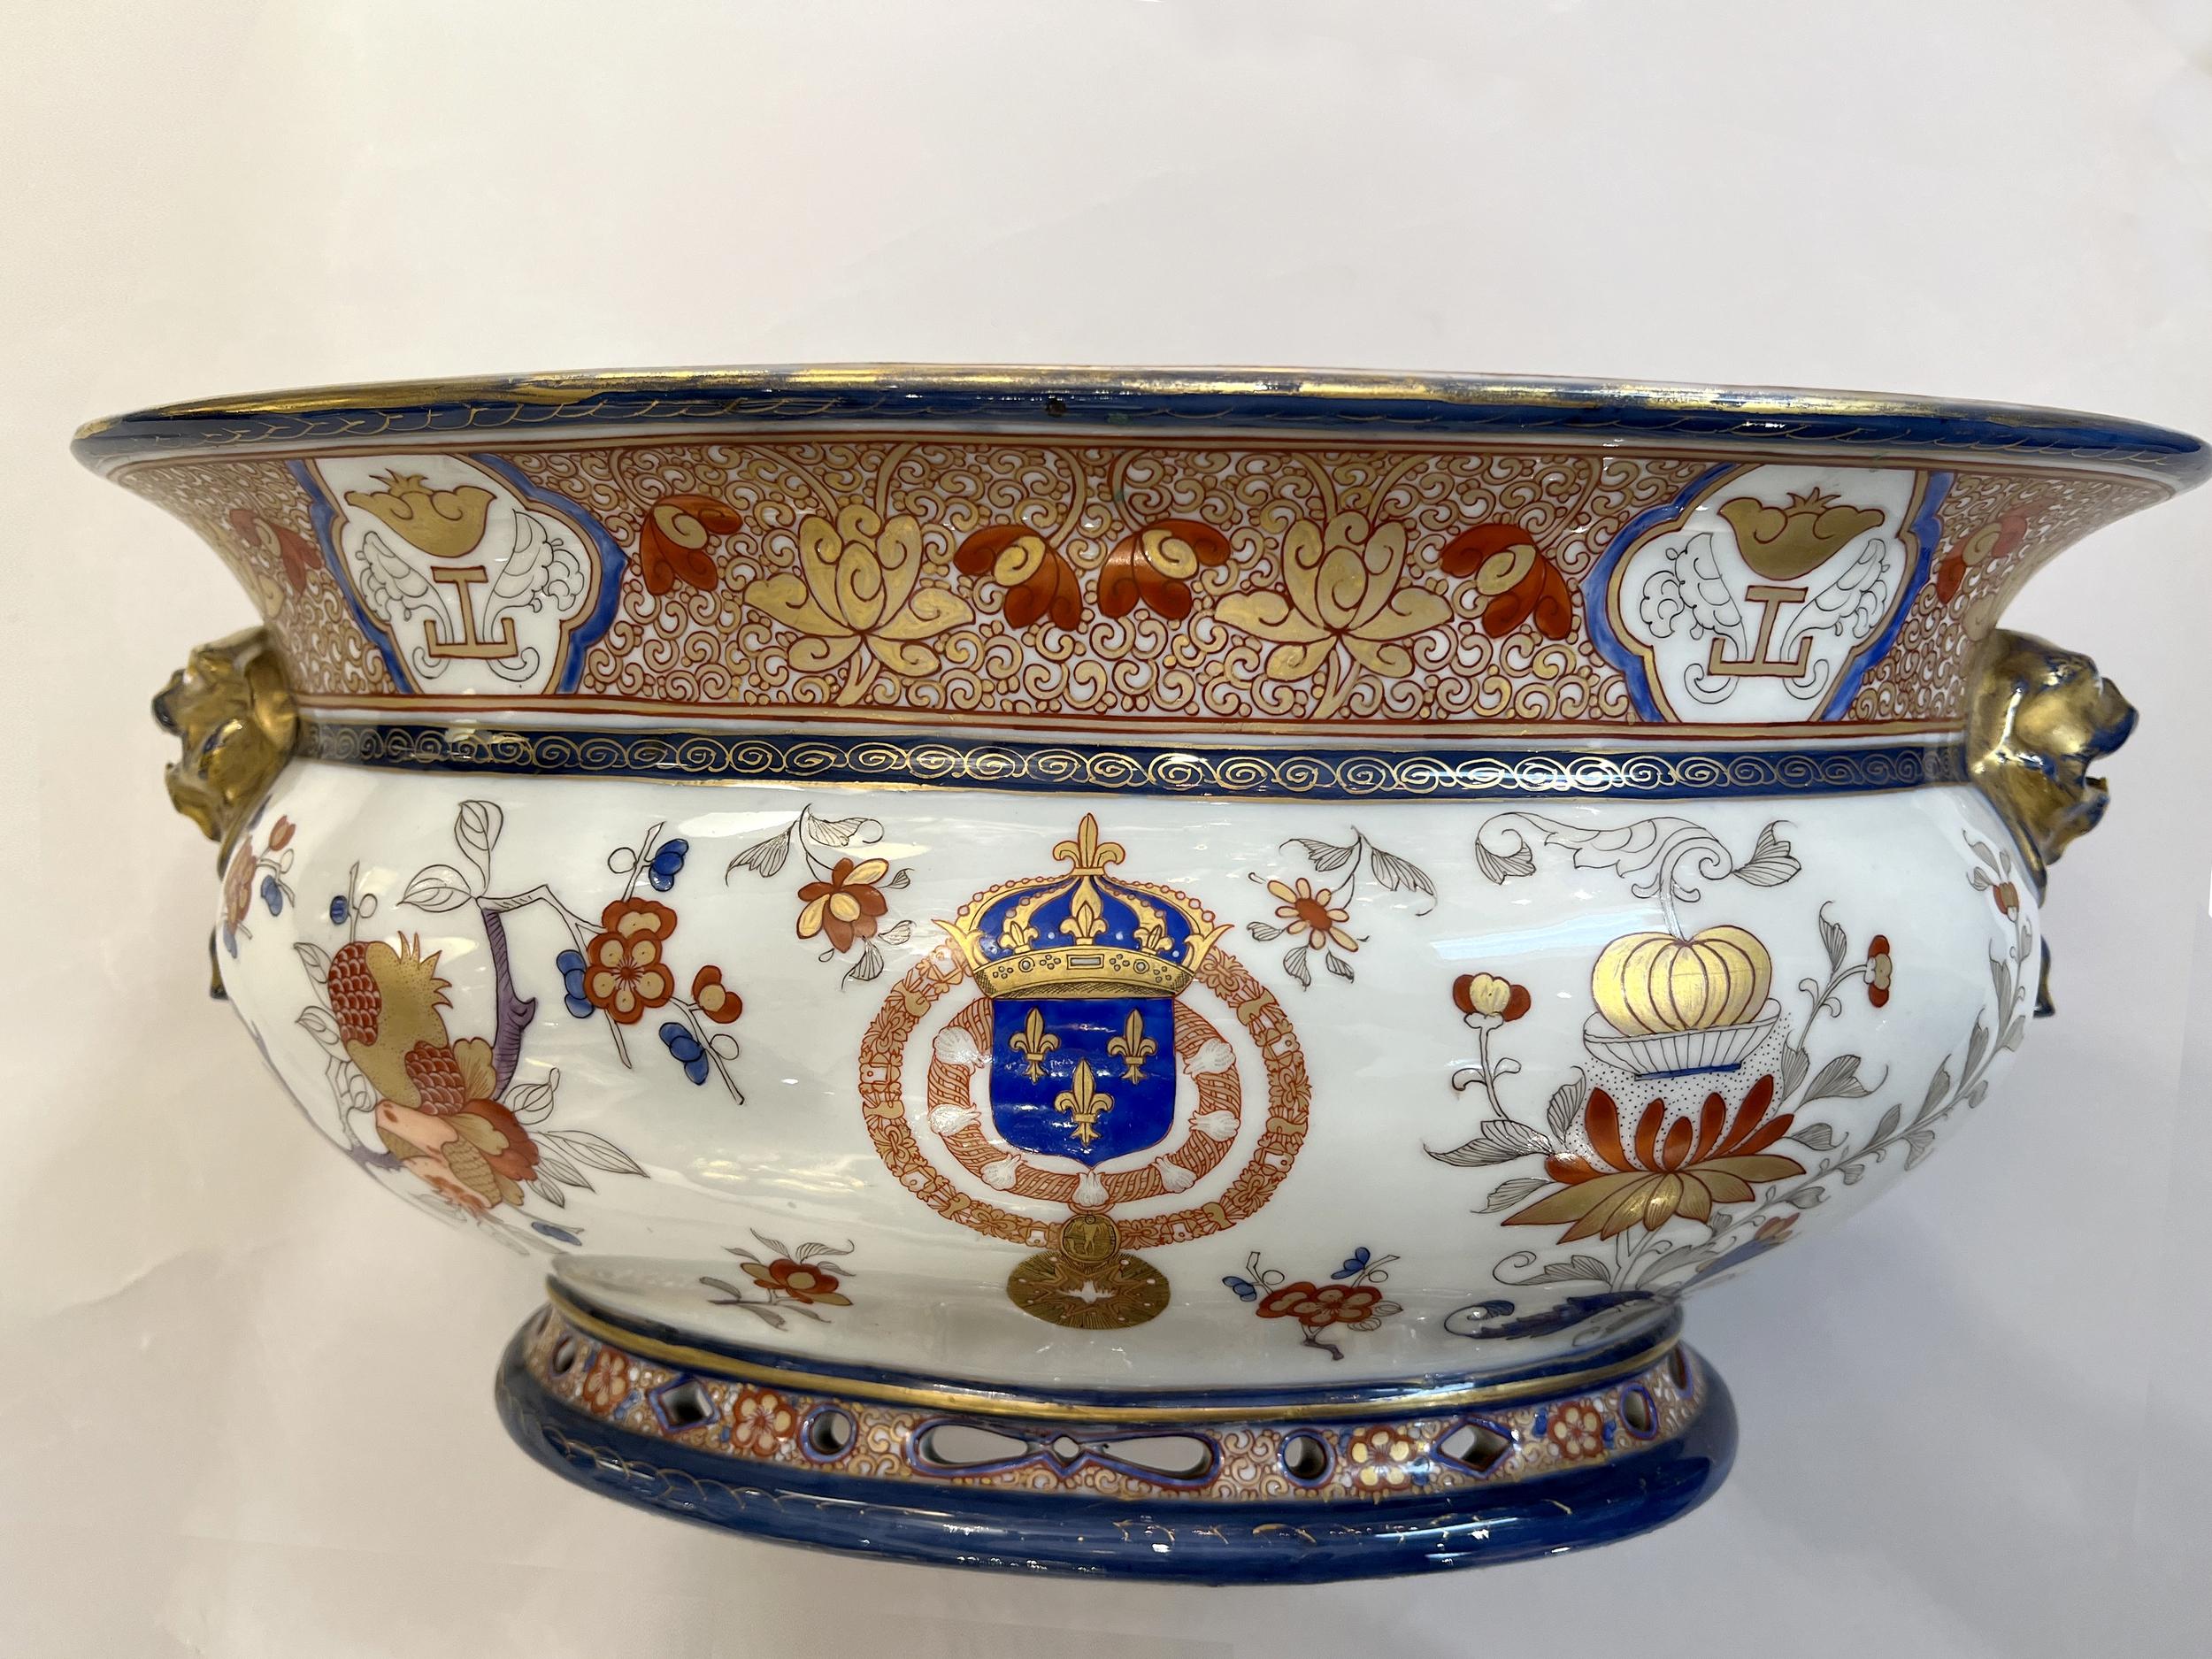 Refresher stand or jardinière with the royal coat of arms of France.
In porcelain in the spirit of the Compagnie des Indes, oval with two chimera-shaped handles, with polychrome and gold decoration of pomegranate branches, chrysanthemums and fruit,